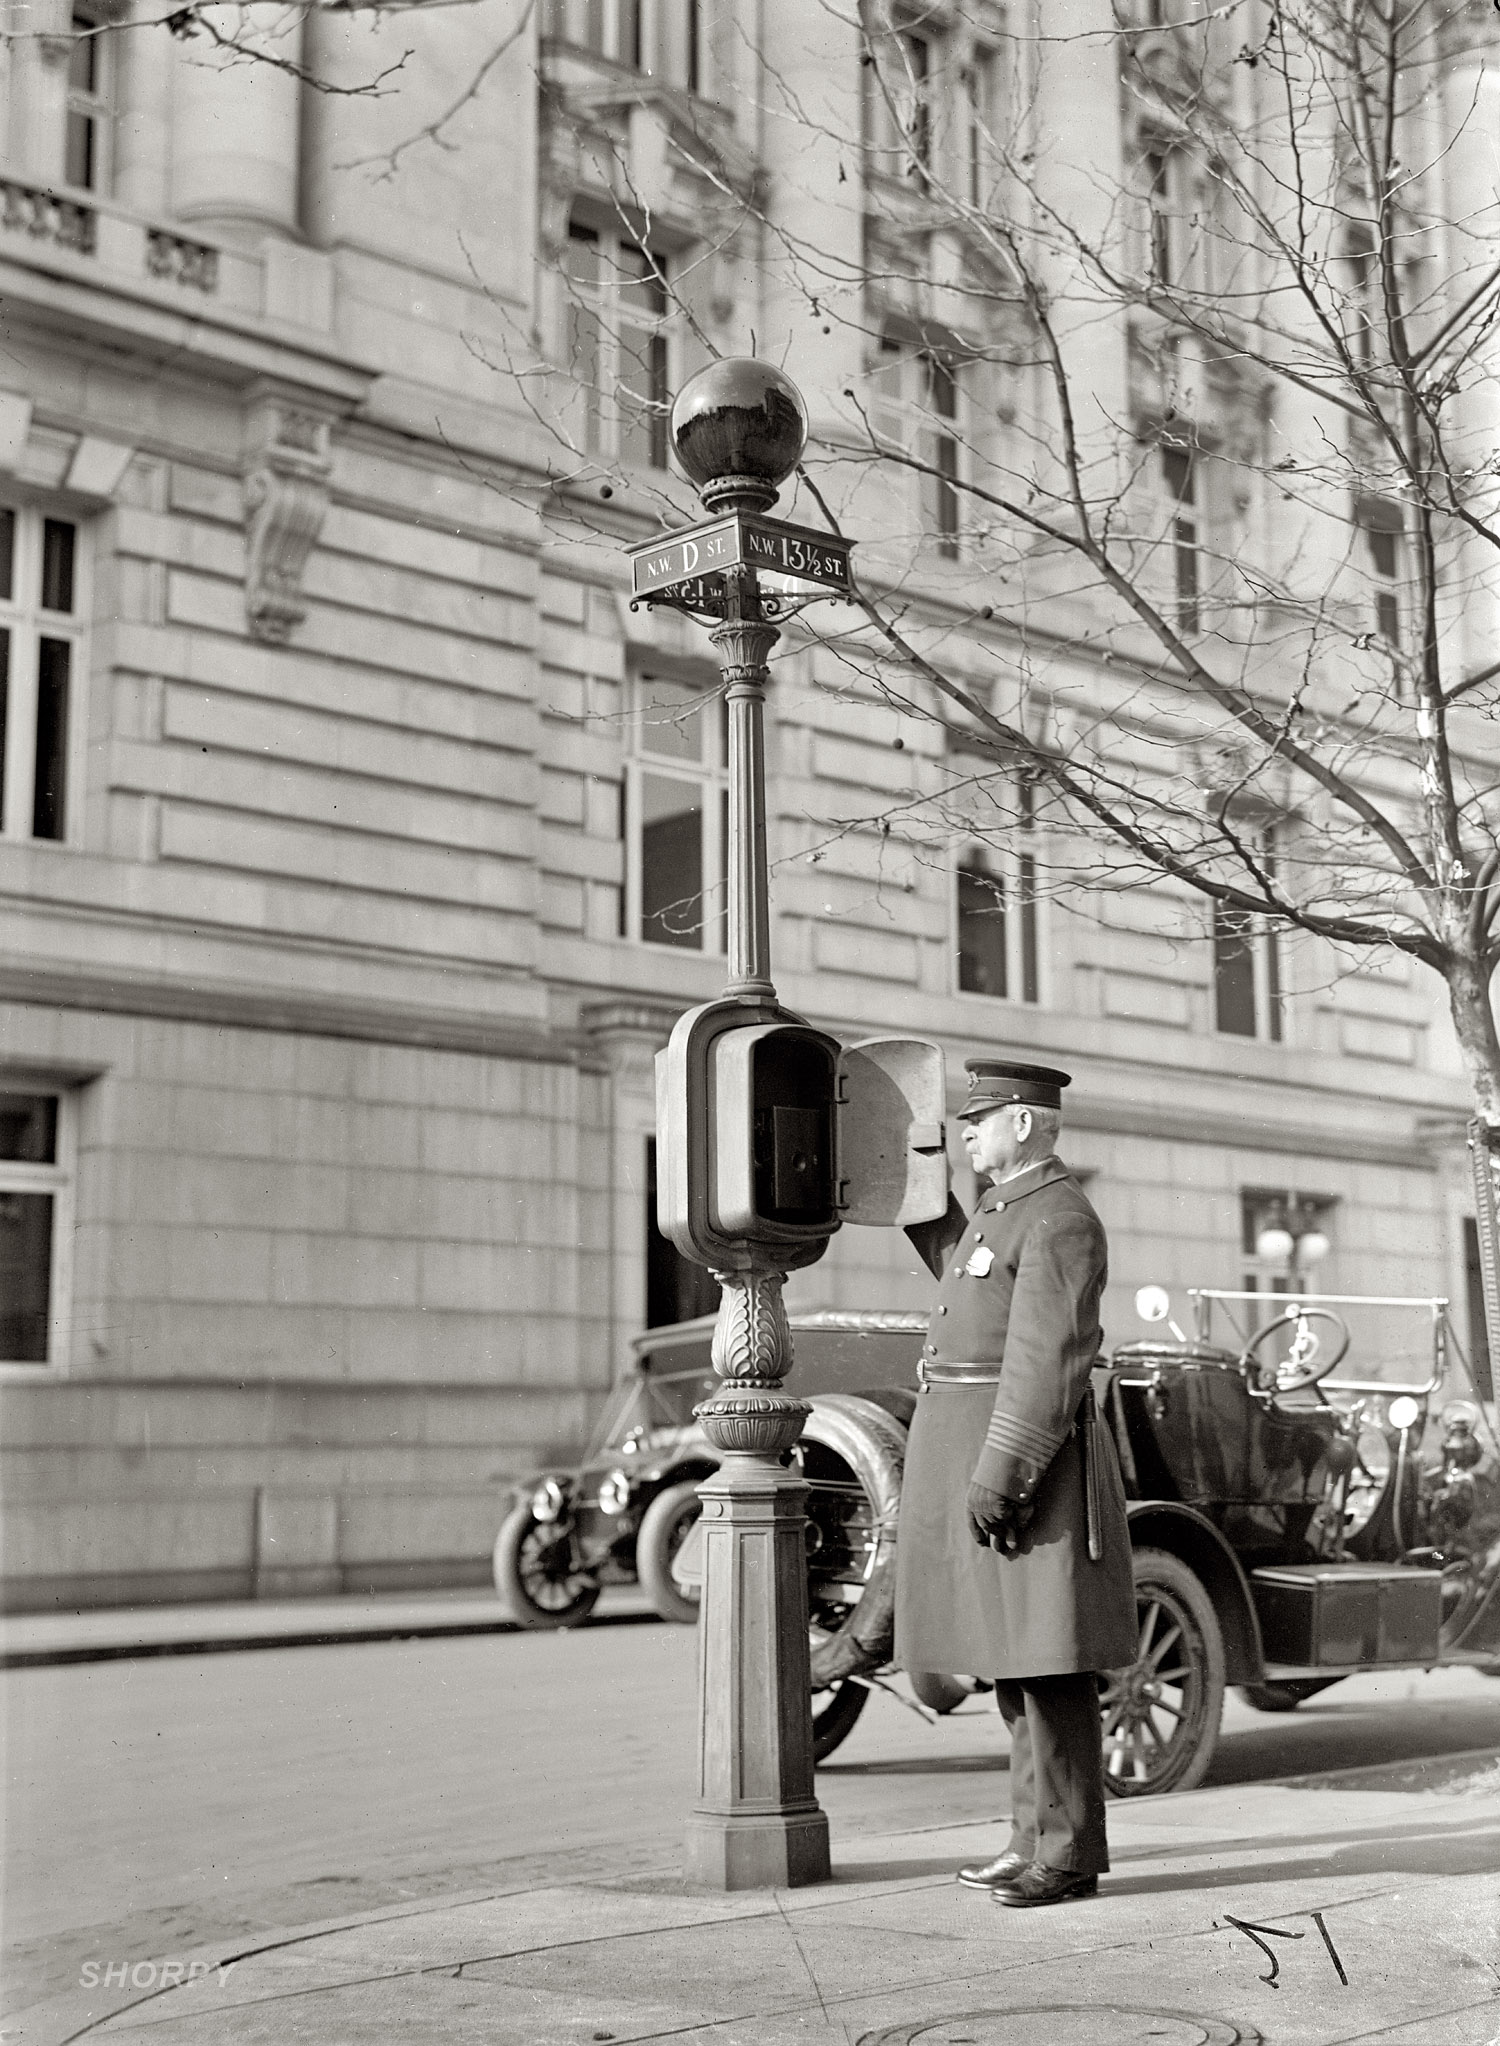 Washington, D.C., circa 1912. "Police Call Box." Finally we have a closeup of a mysterious item of street furniture on view in many of our urban scenes -- what looks like a streetlight with a dark globe. These were telephones with a direct line to the police station. When a call went out, the red illuminated globe showed arriving officers where help was needed. This one was downtown at 13½ and D streets N.W. Harris & Ewing Collection glass negative. View full size.